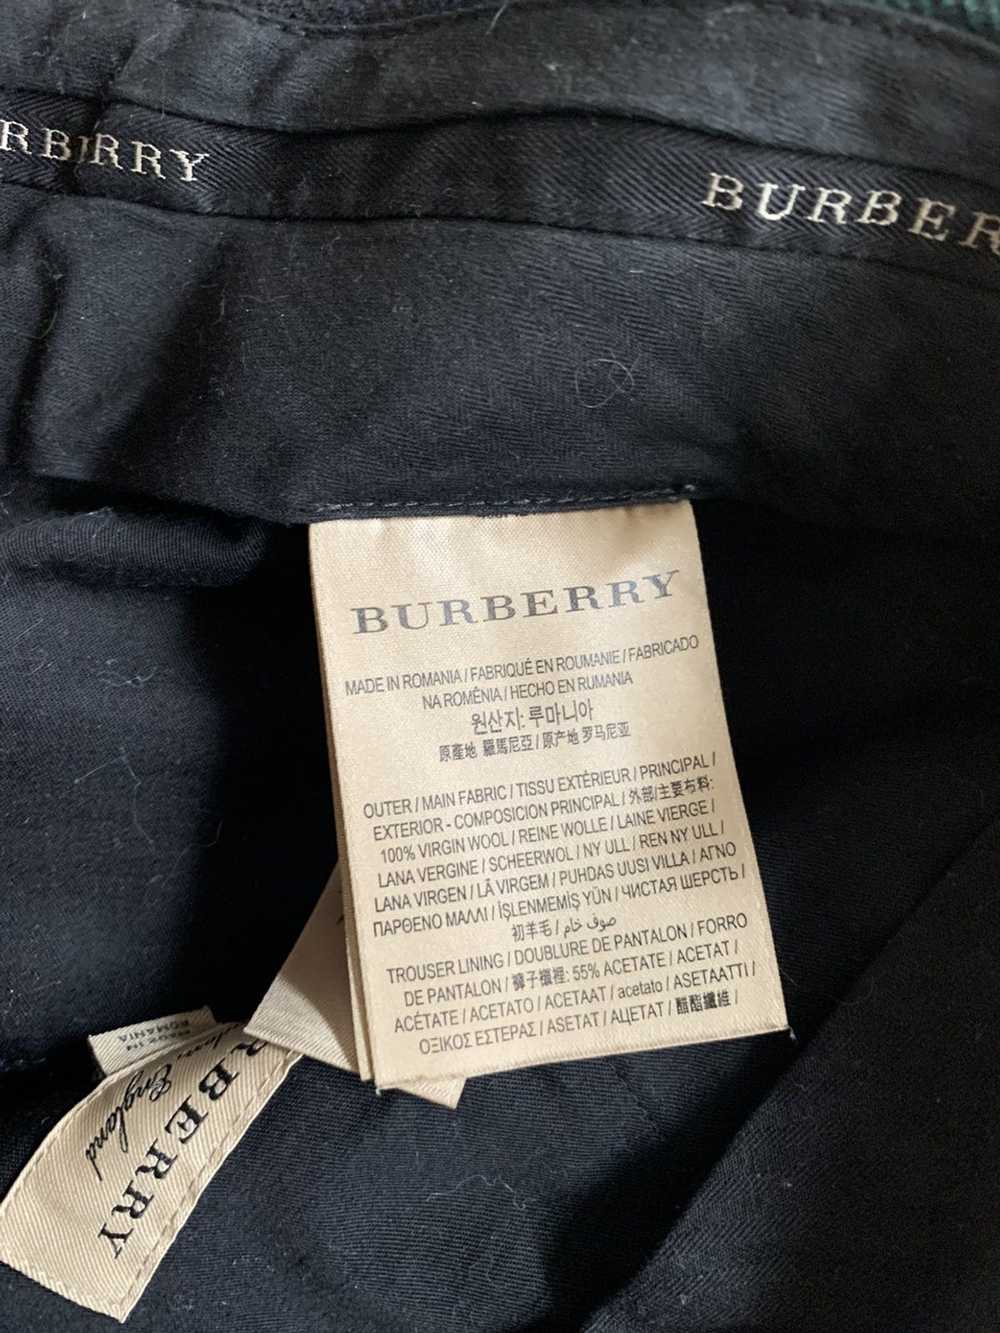 Burberry Burberry Checkered Wool Pants - image 4